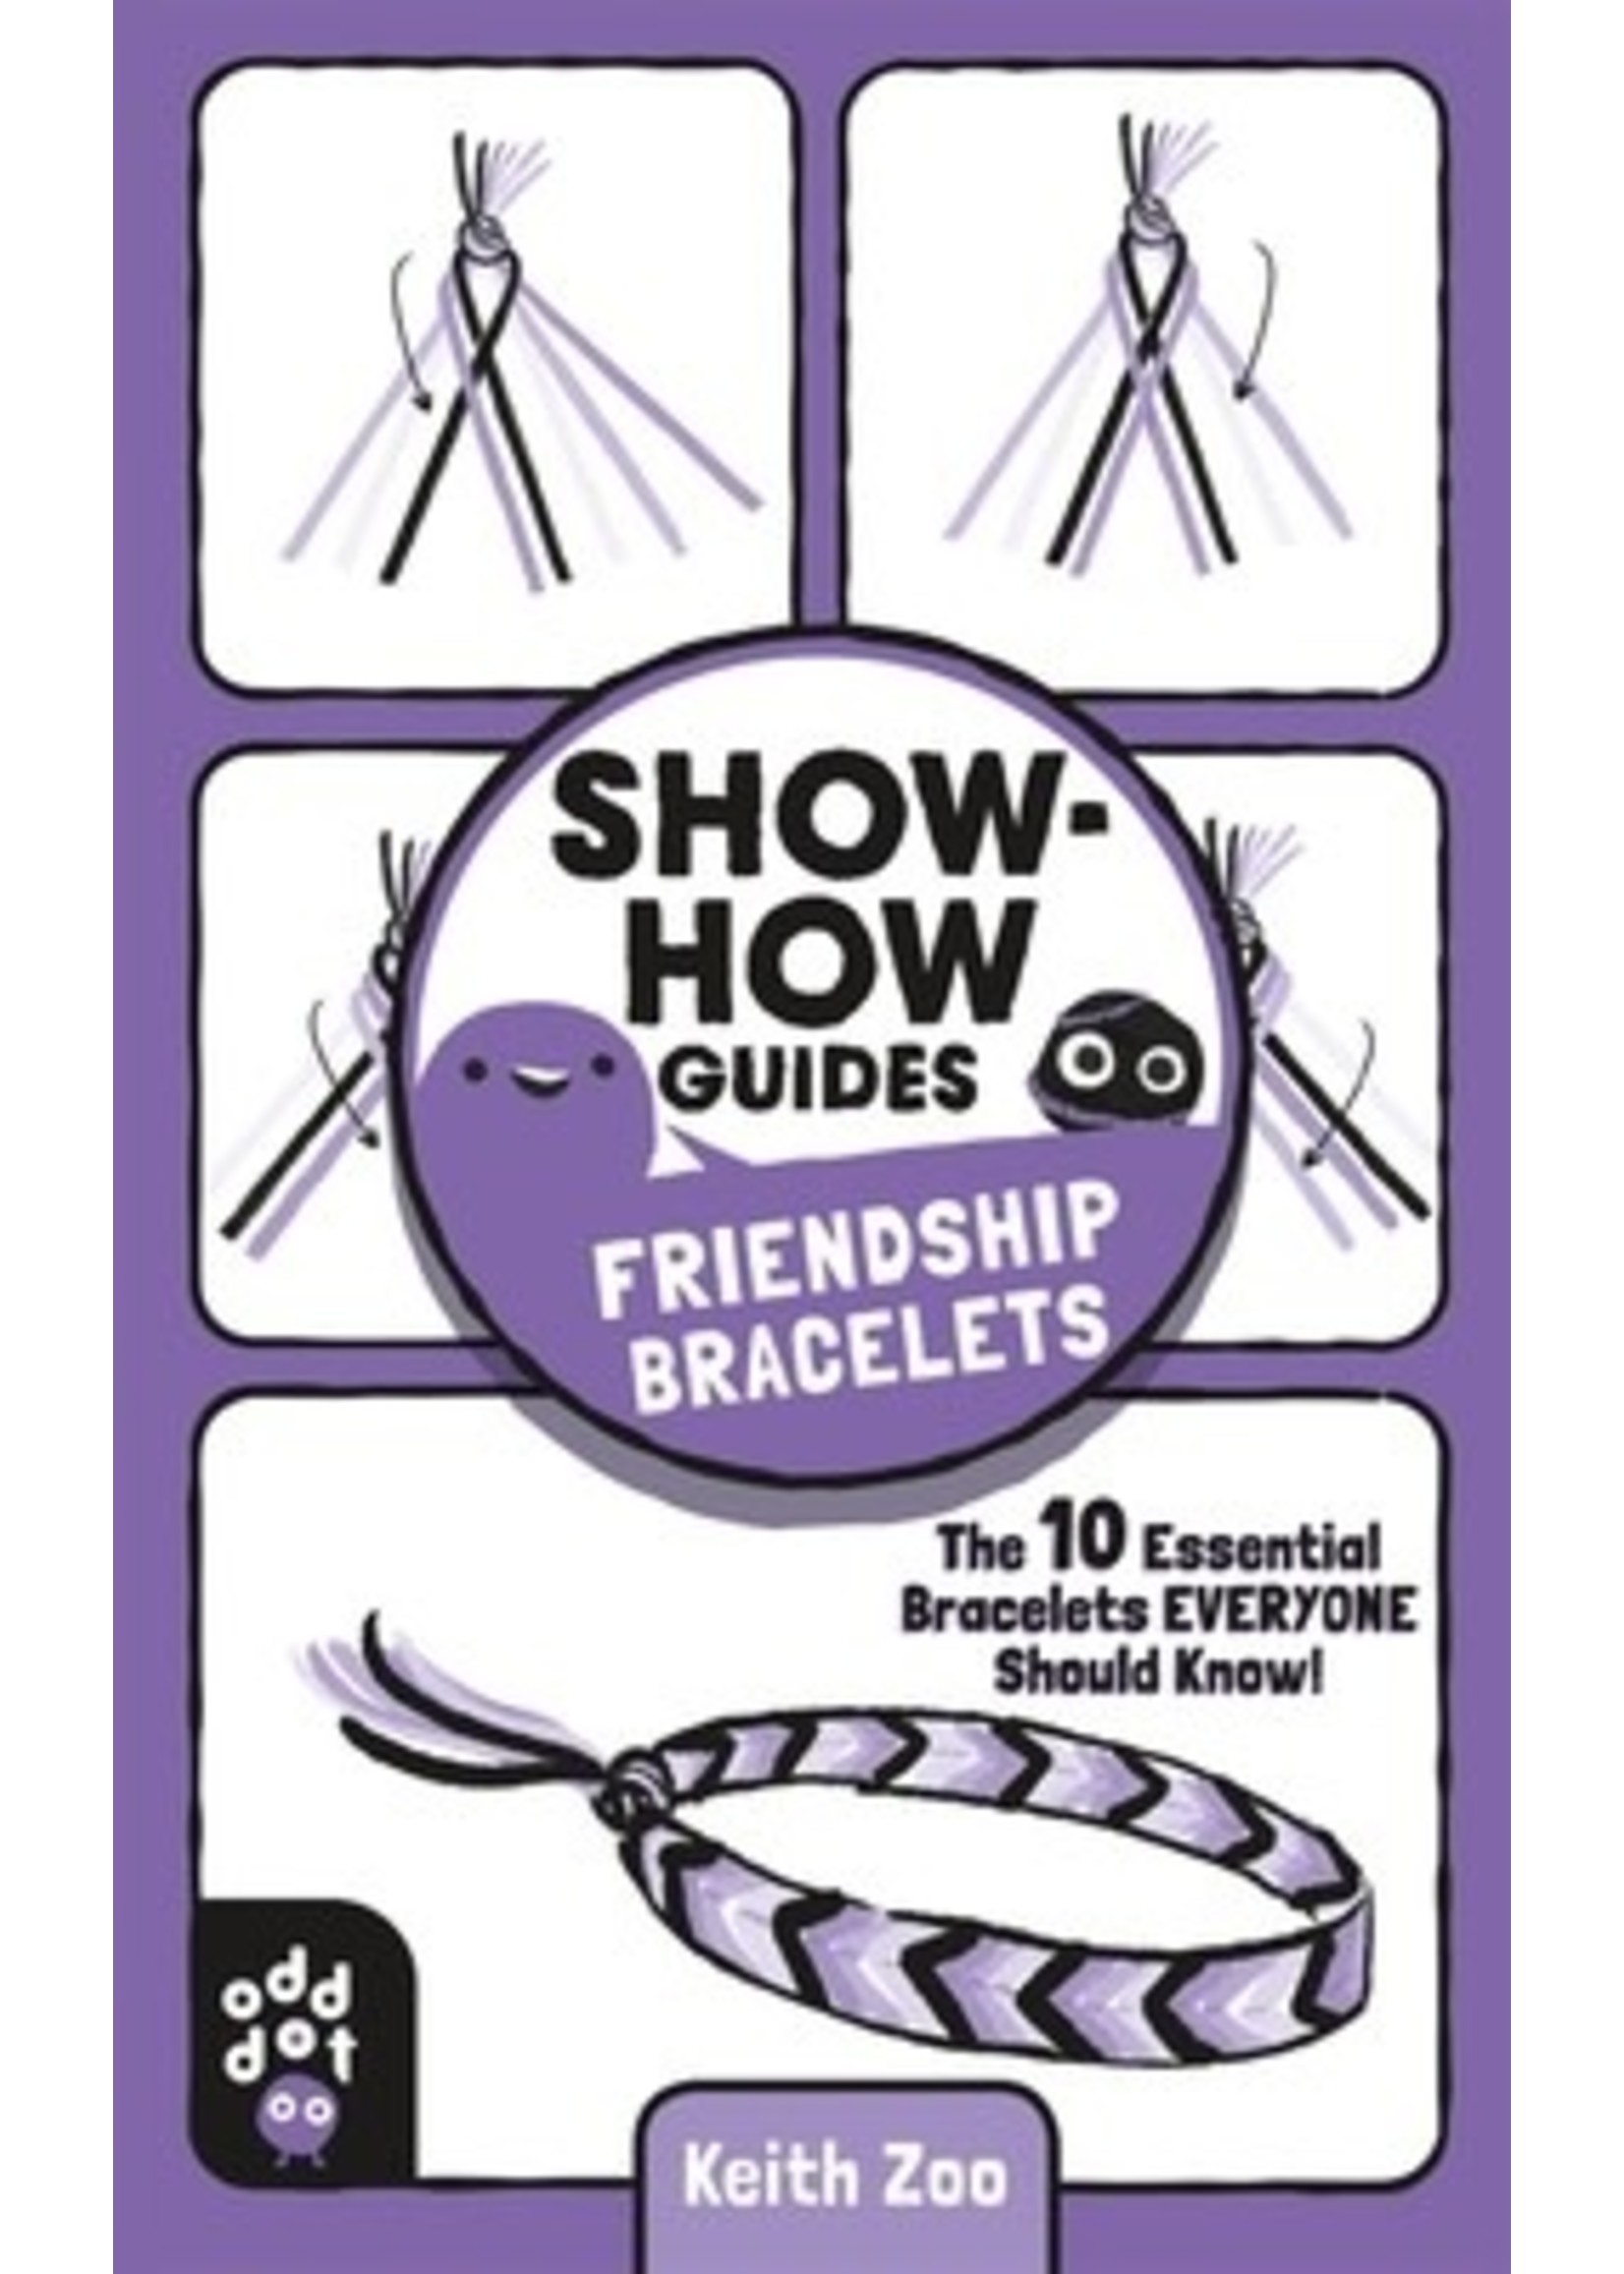 Show-How Guides: Friendship Bracelets: The 10 Essential Bracelets Everyone Should Know! by Keith Zoo